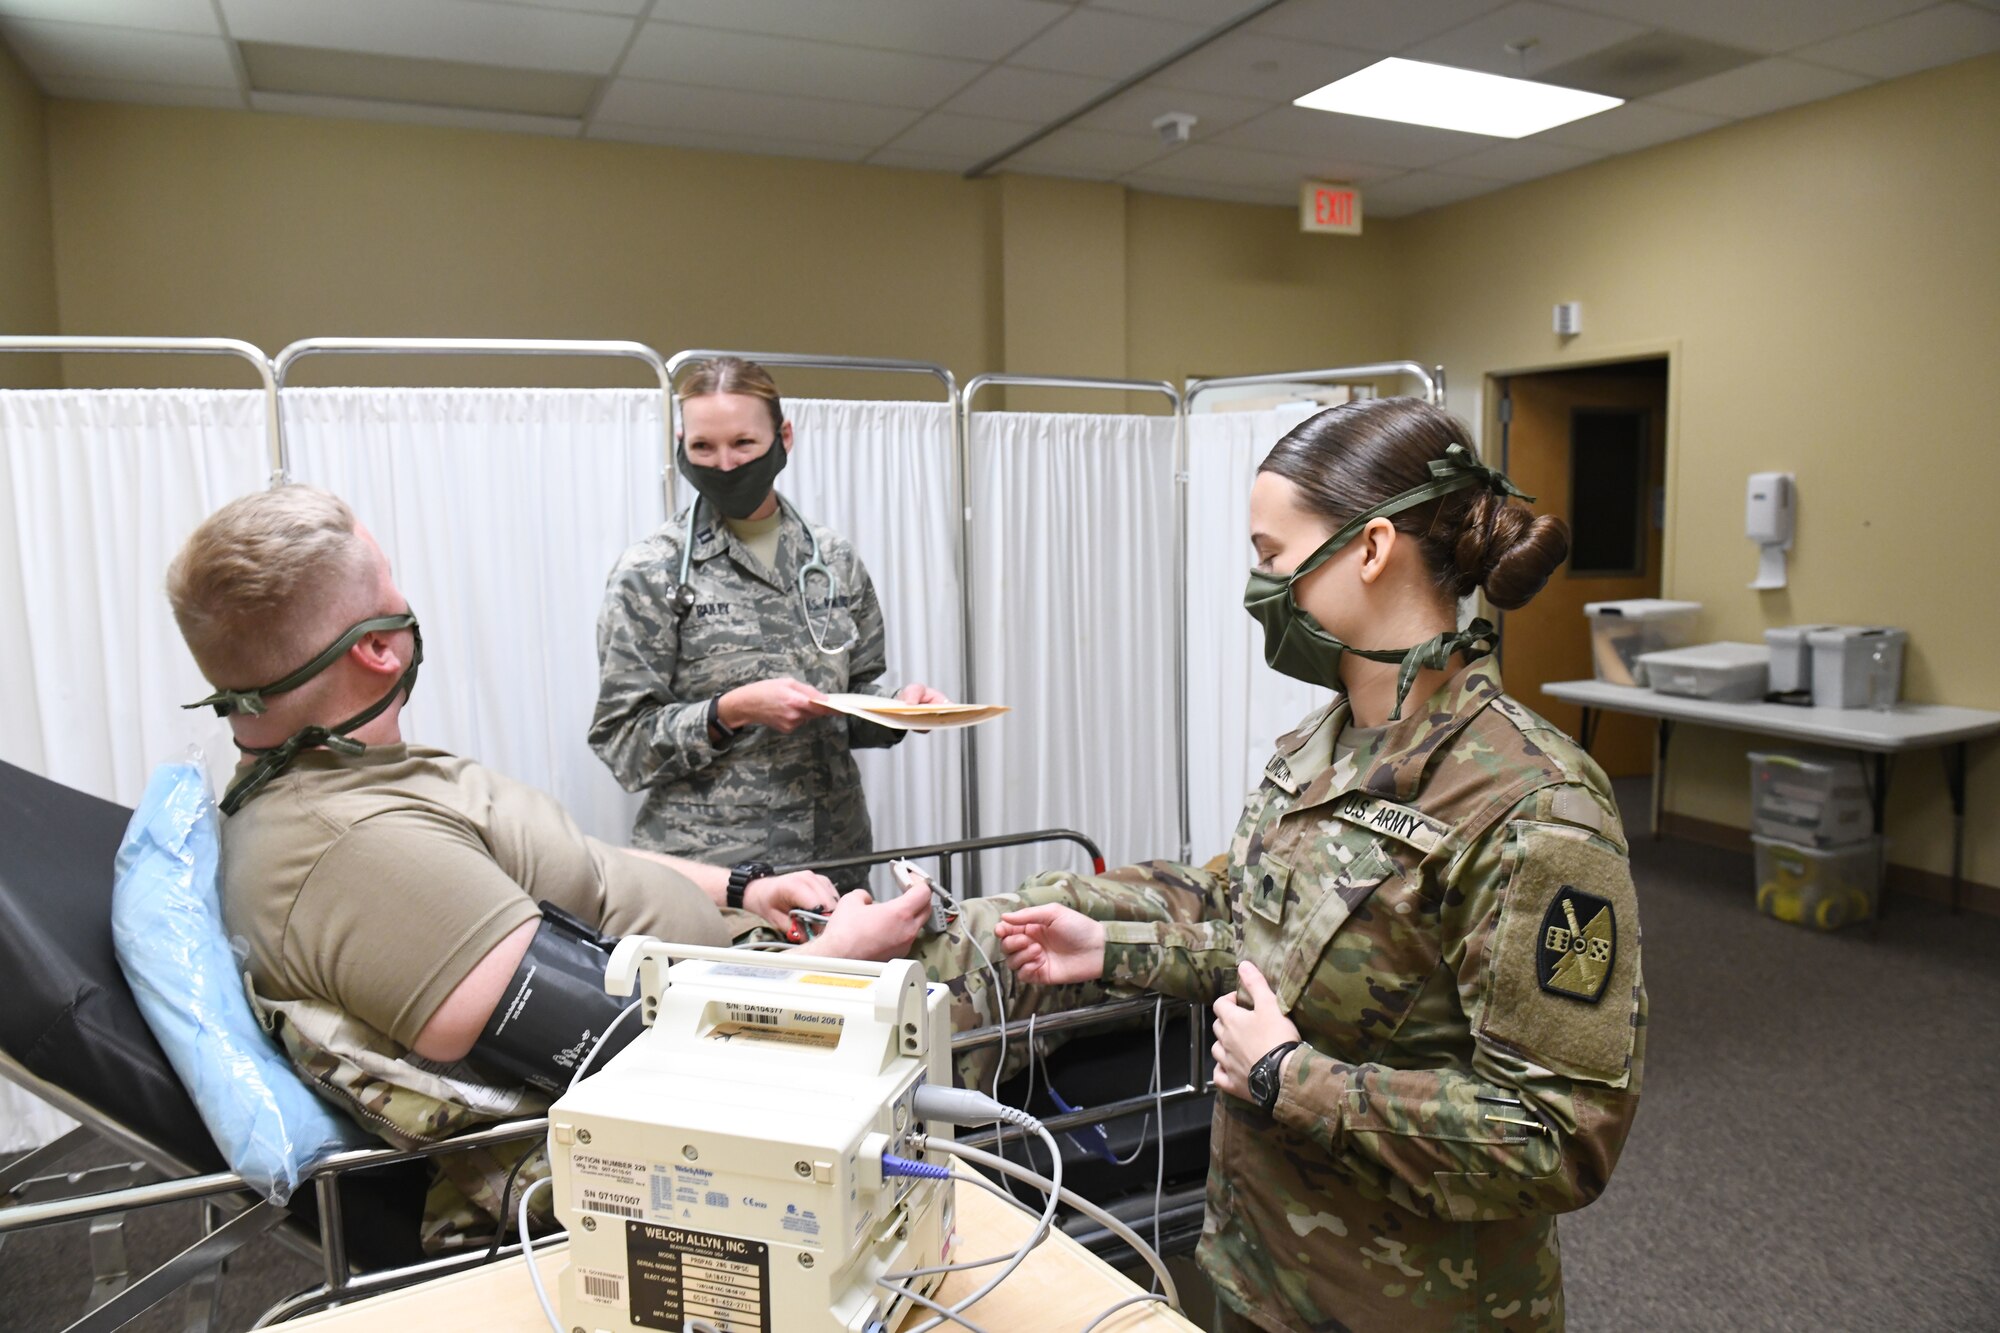 U.S. Air Force Capt. Lauri Bailey, a registered nurse for the 145th Medical Group (left) and U.S. Army Specialist Samantha Klimczak, a medic with the North Carolina Army National Guard (right) practice treating a simulated patient, while conducting drills prior to the arrival of live patients, at the North Carolina National Guard Medical Support Shelter (MSS), Central North Carolina, April 29, 2020. The MSS is intended to act as an overflow shelter for hospital patients not infected with the COVID-19 virus and is maned by a joint task force of Army and Airforce National Guard medical staff.